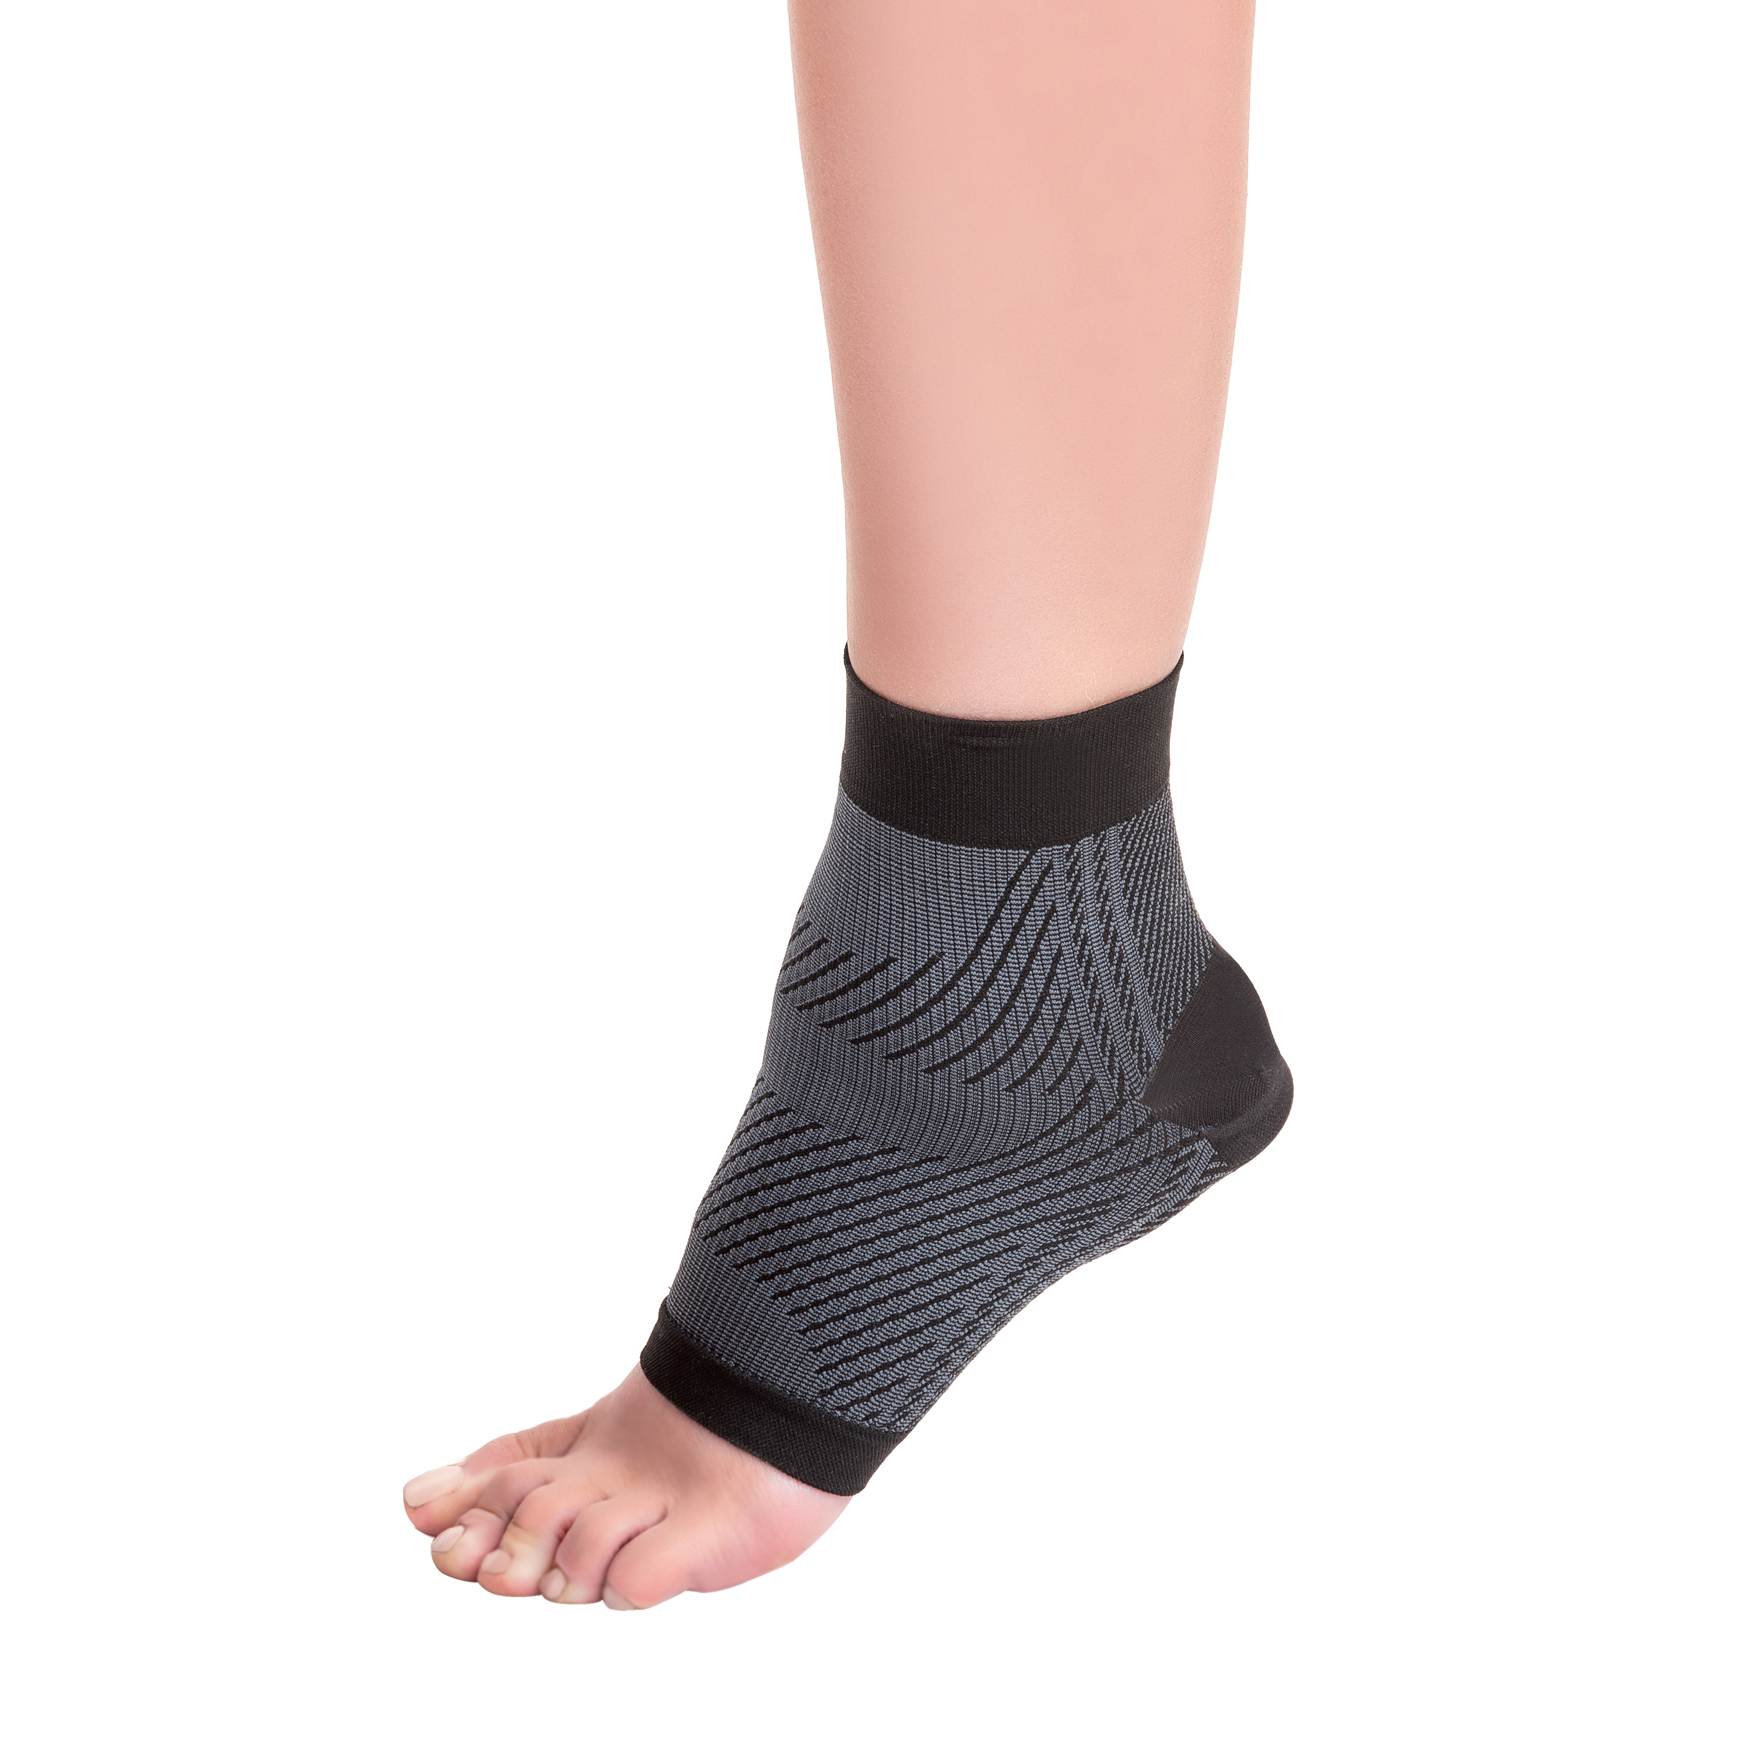 Plantar Fasciitis Support W/Silicone Cup - The Foot and Ankle Clinic